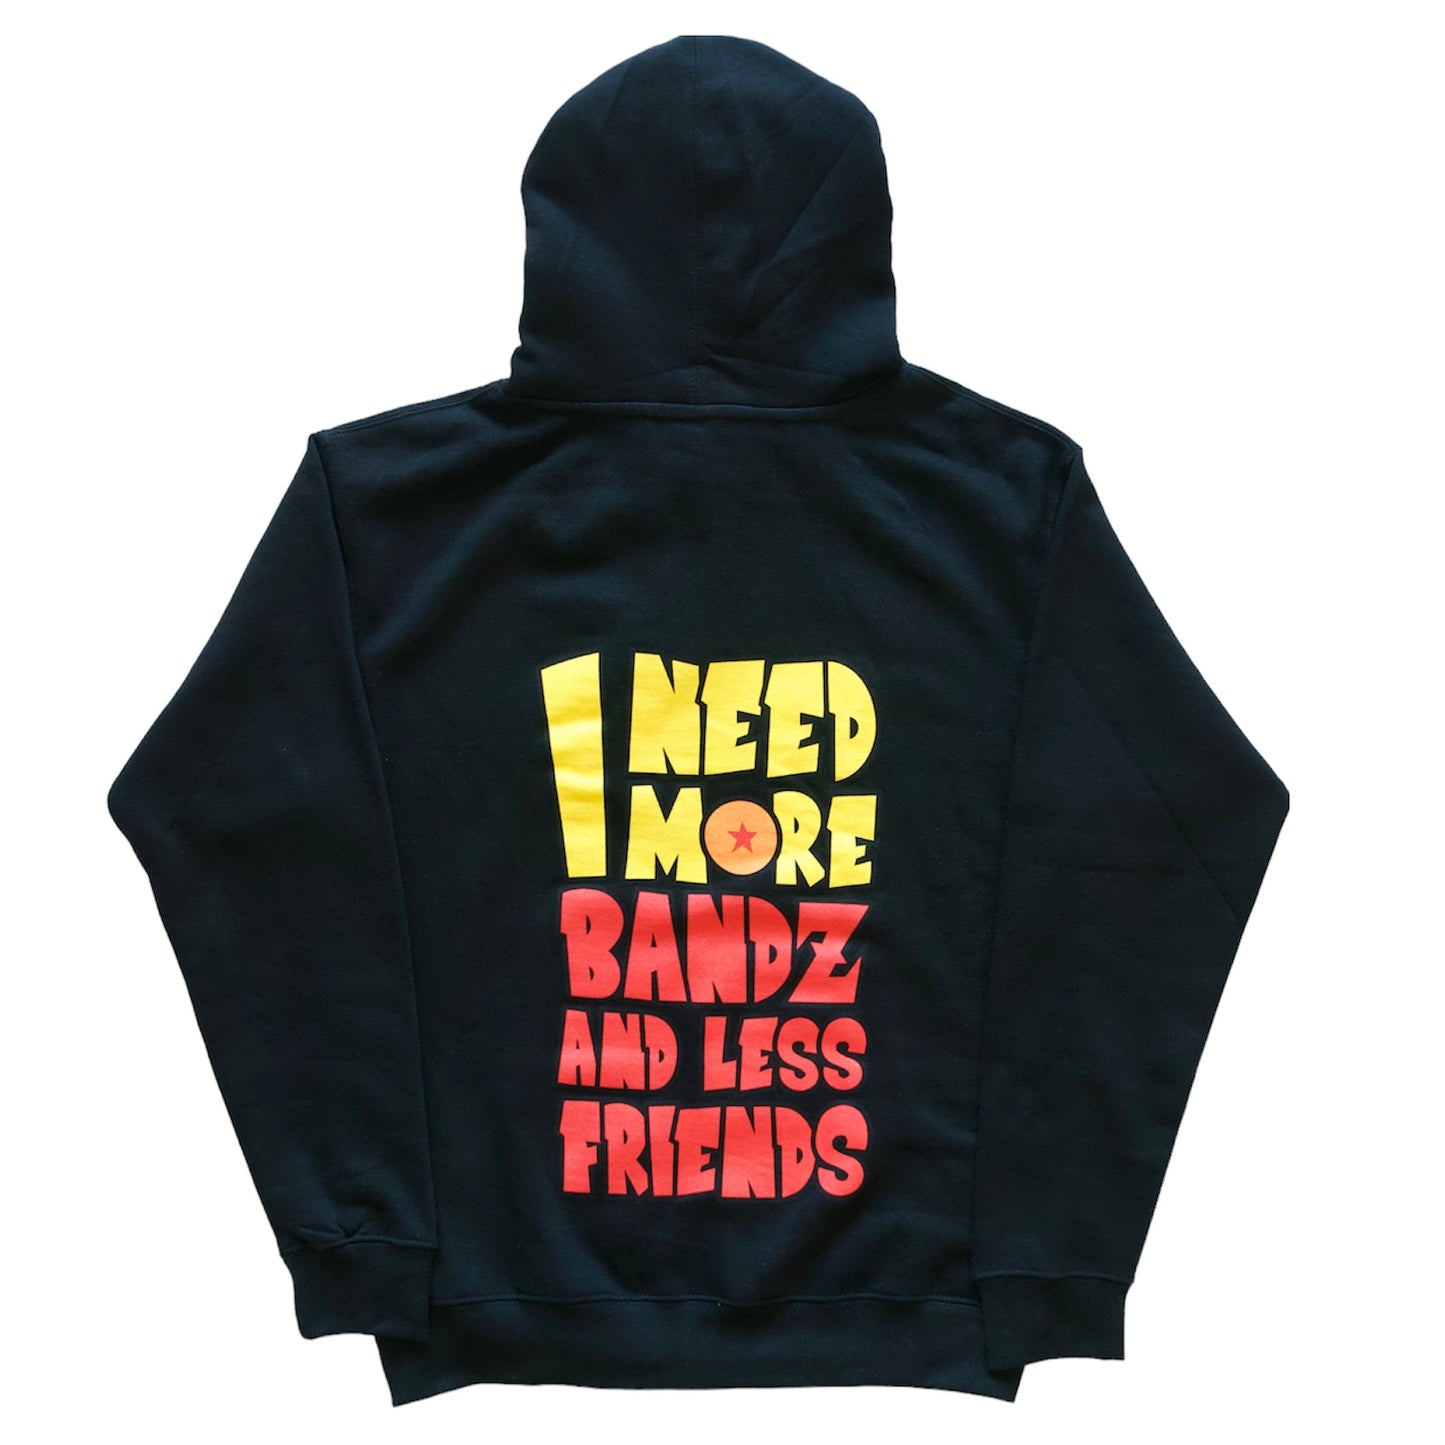 Black “I Need More Bandz And Less Friends” Hoodie